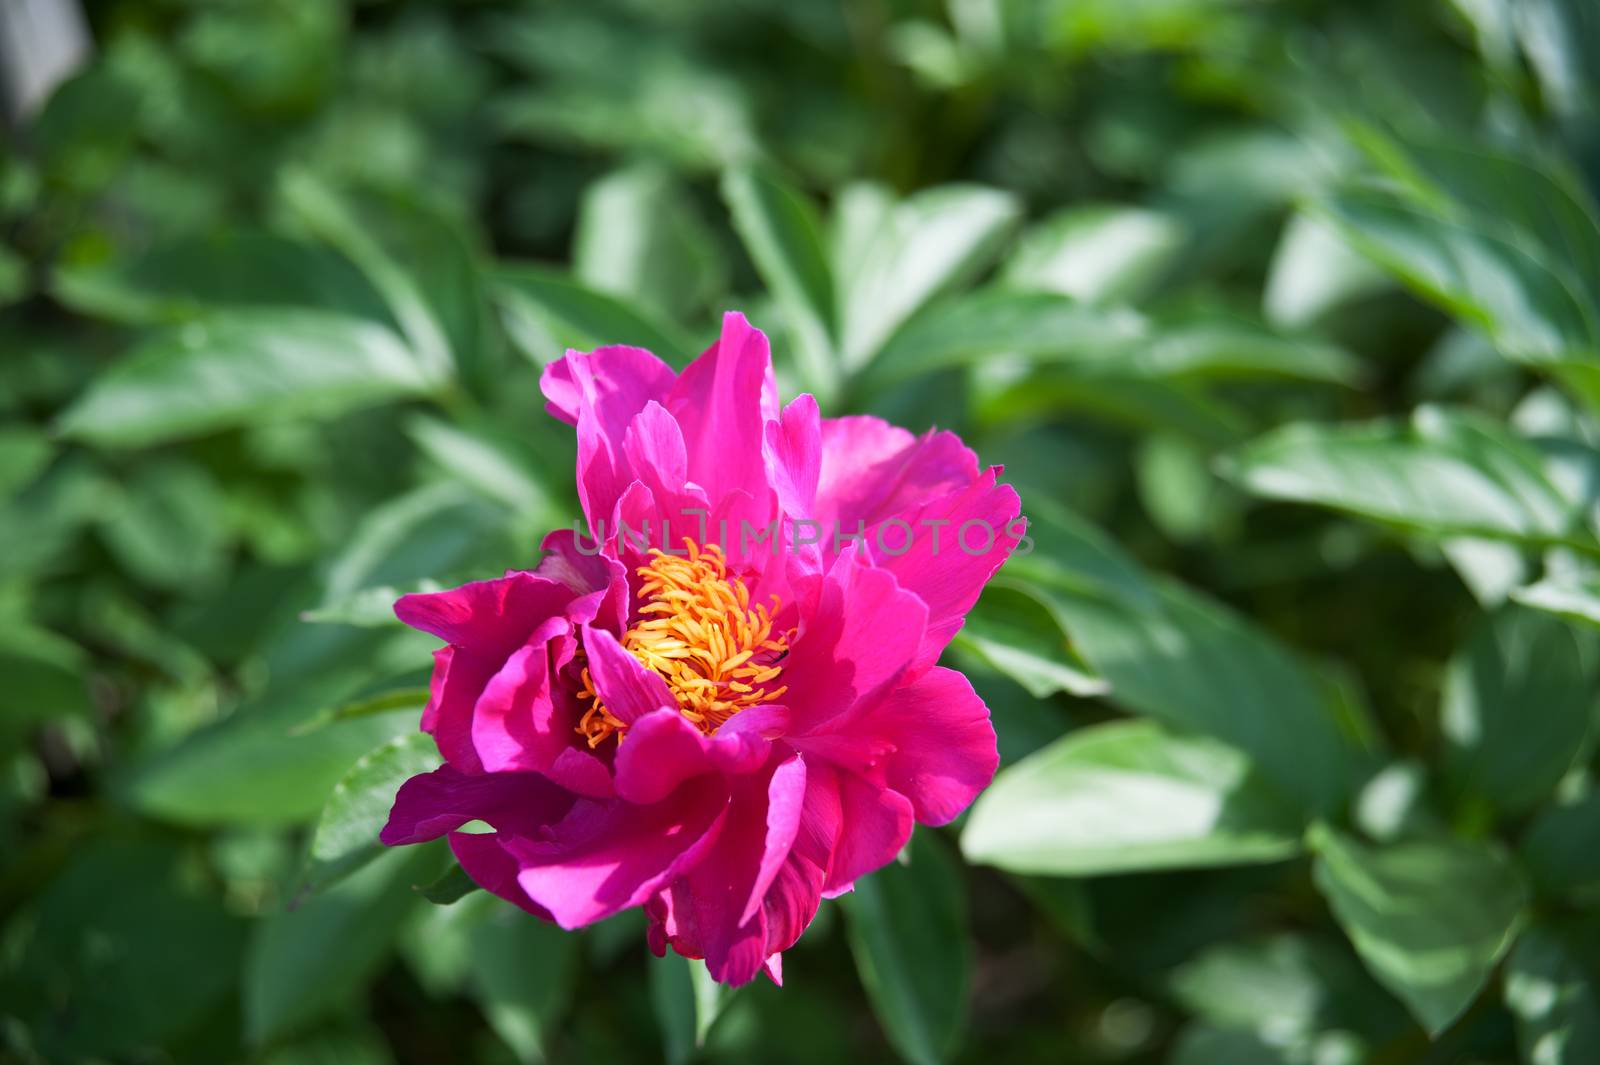 pink peonies among the green leaves in the garden